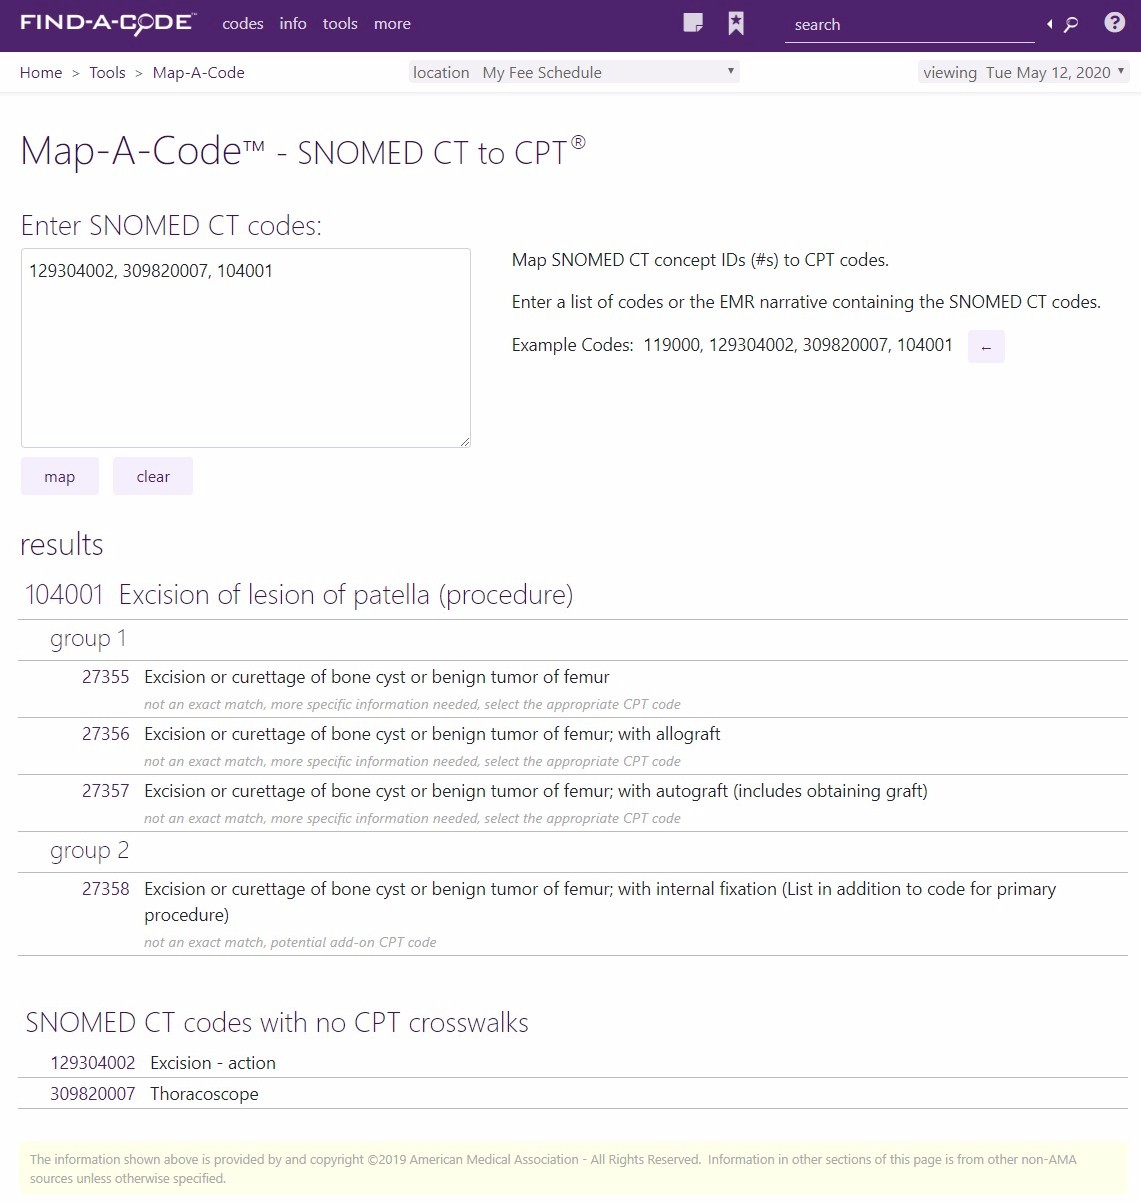 Map-A-Code tool for SNOMED CT to CPT crosswalks